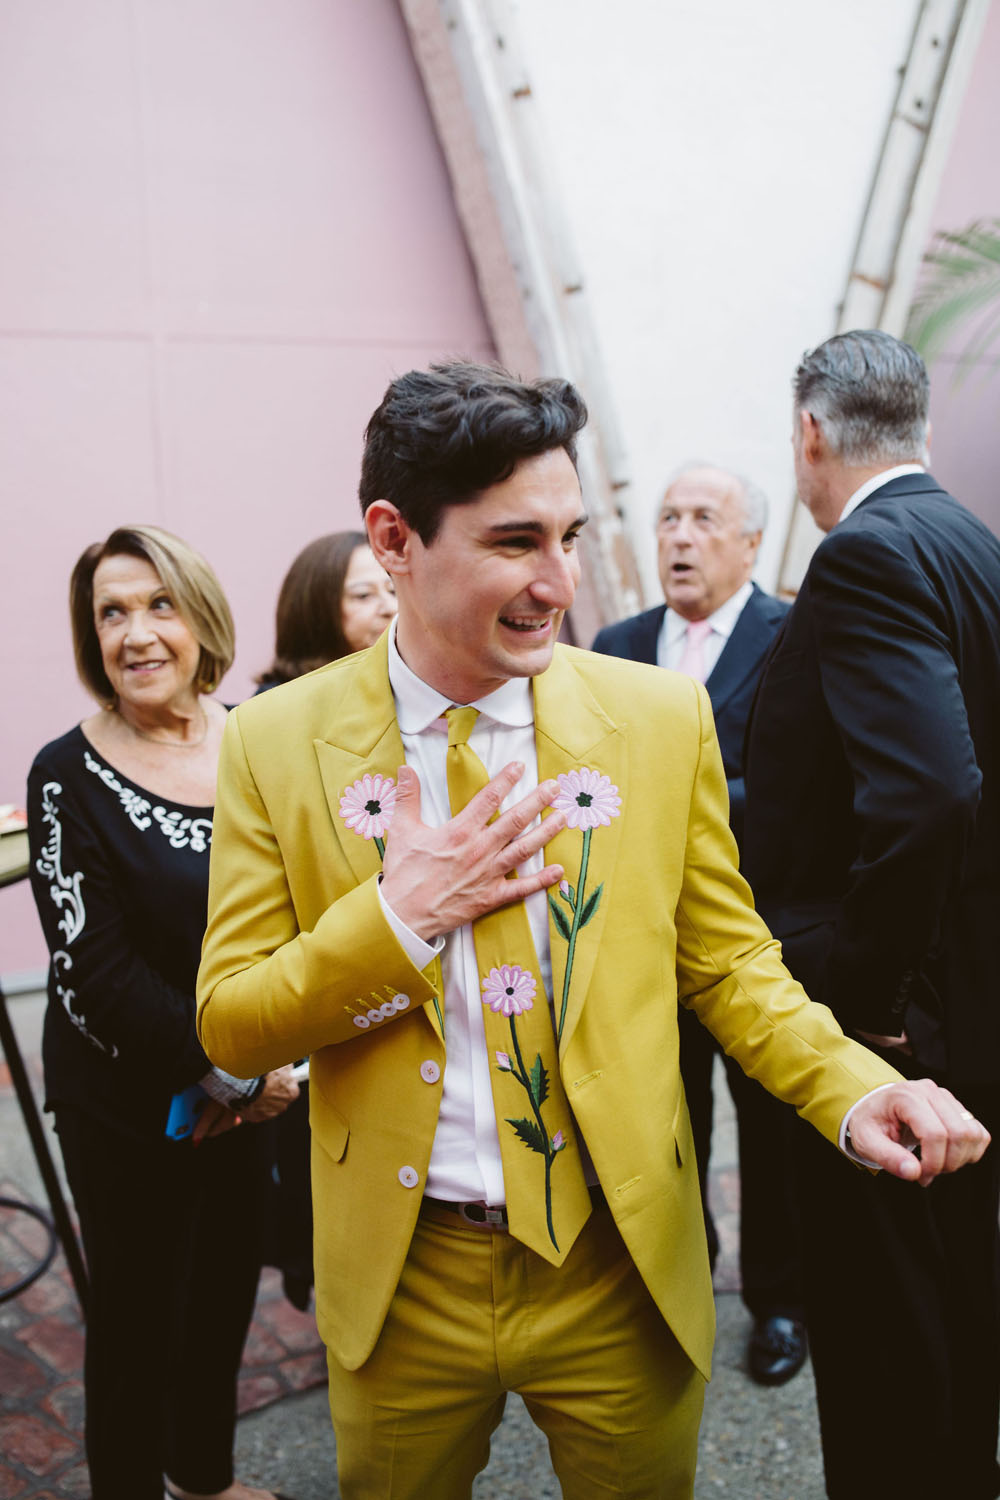 retro yellow groom's suit with embroidered flowers